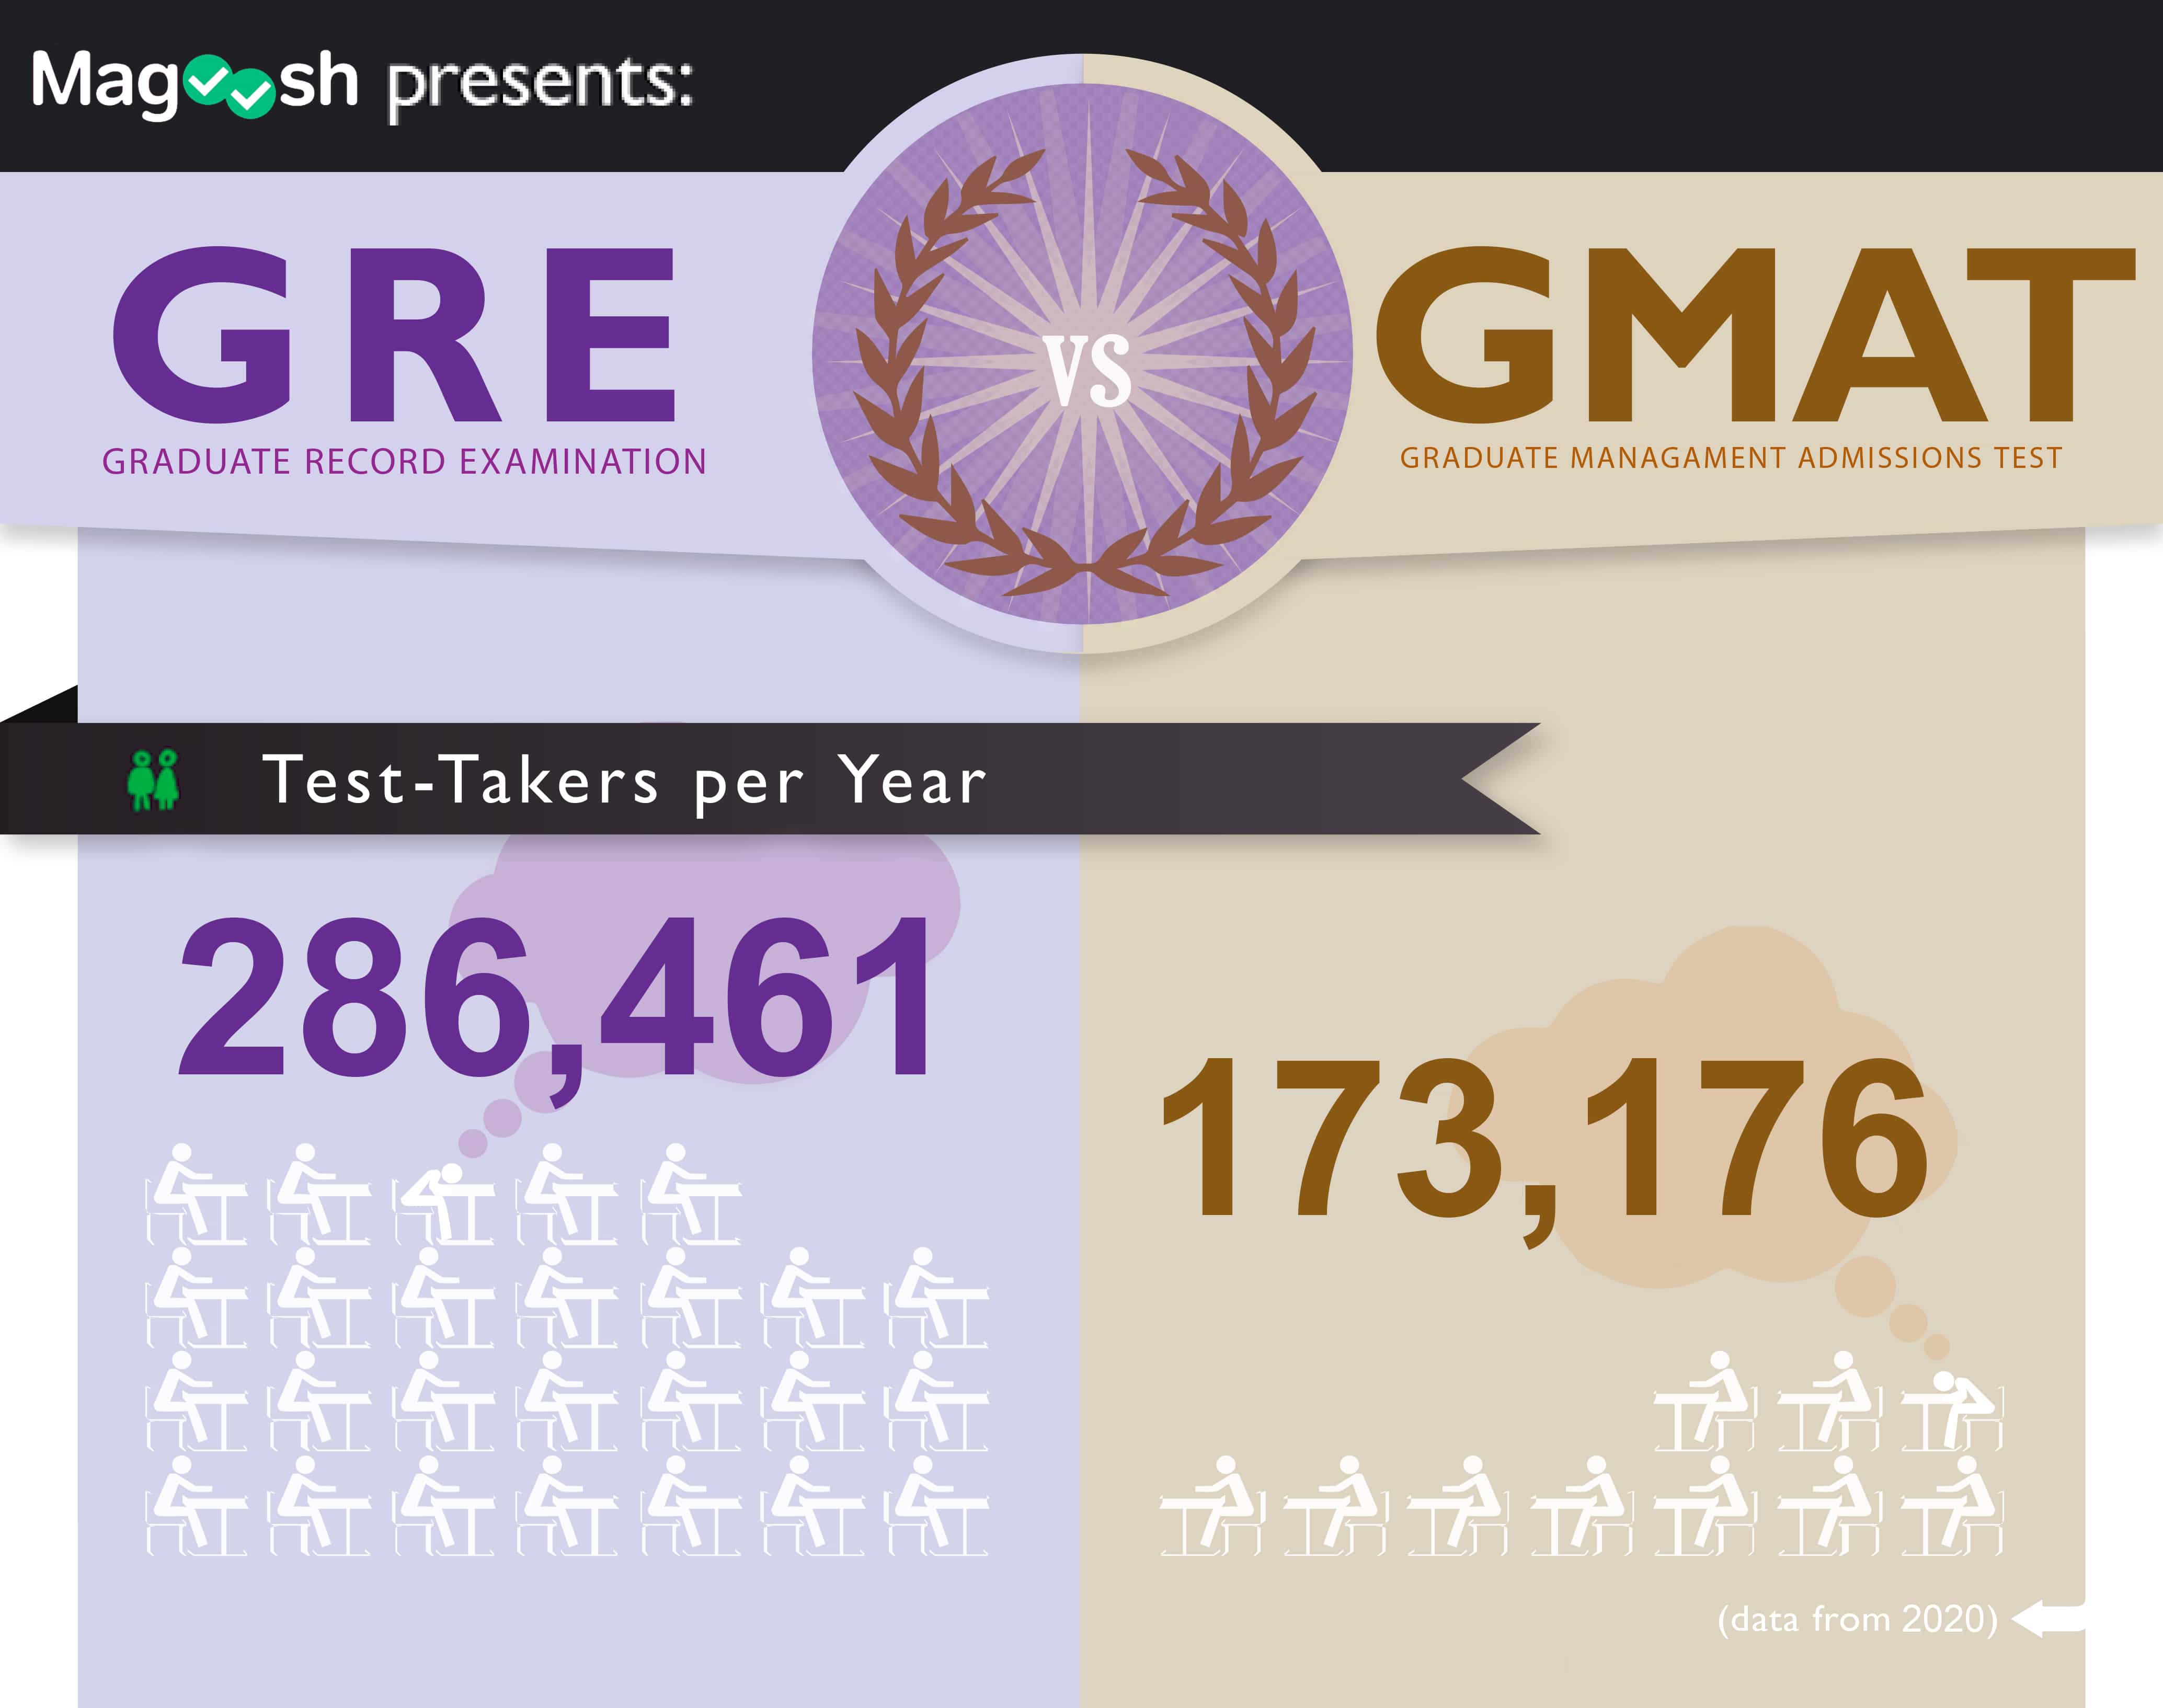 GMAT vs. GRE test-takers - infographic by Magoosh